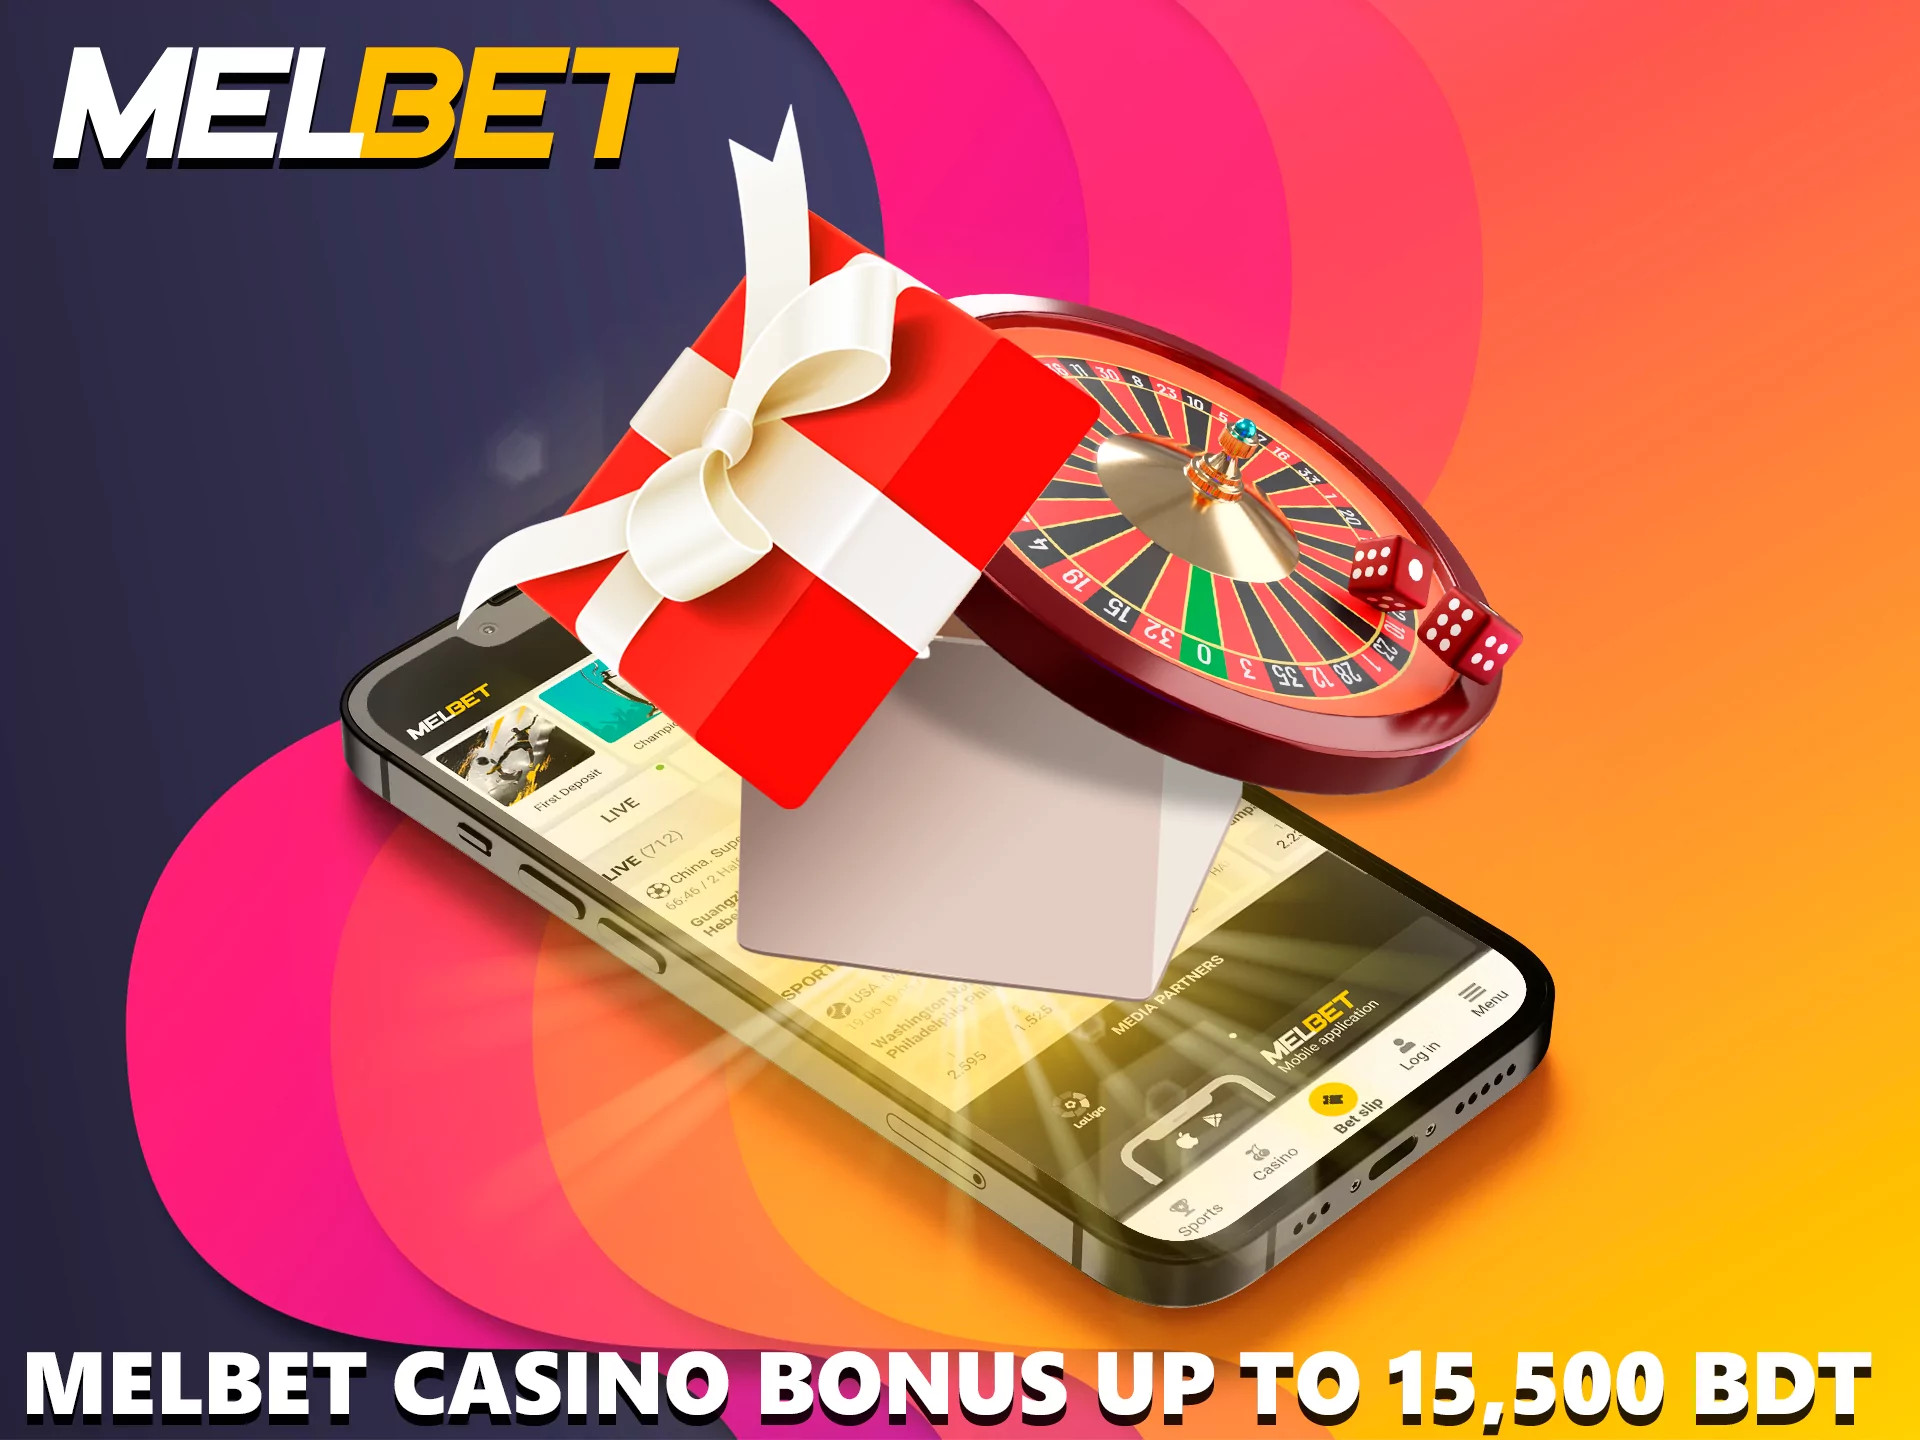 Multi-stage bonus in Melbet, divided by 5 points, get up to 175,000 BDT.